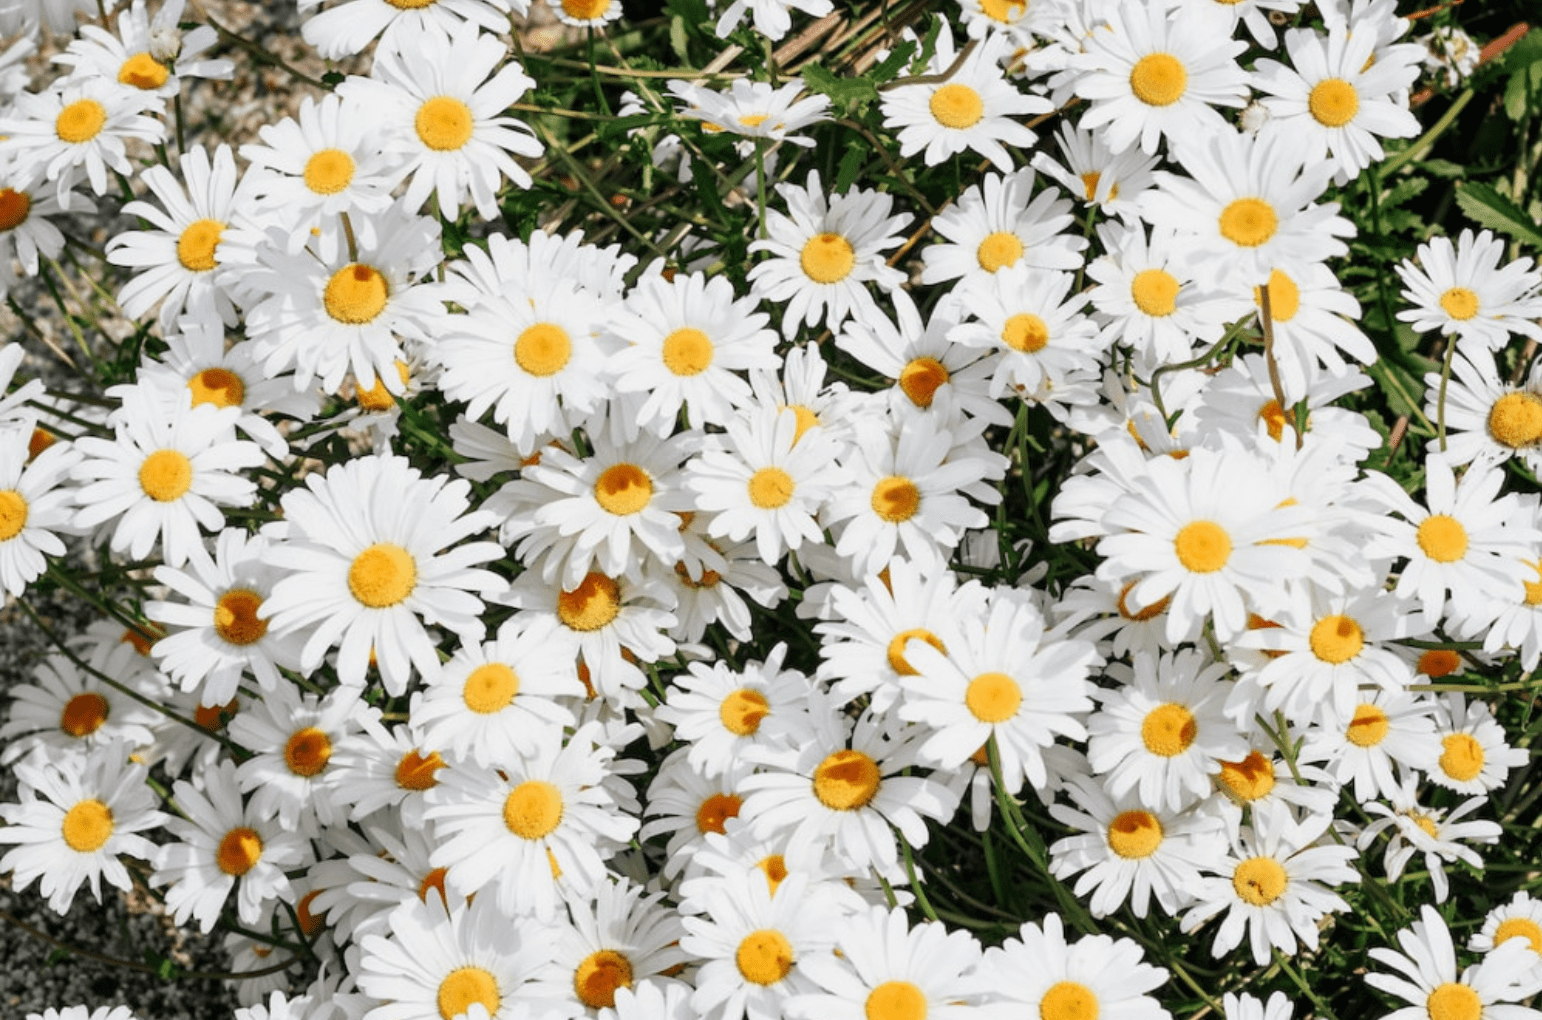 Are Daisies Weeds?